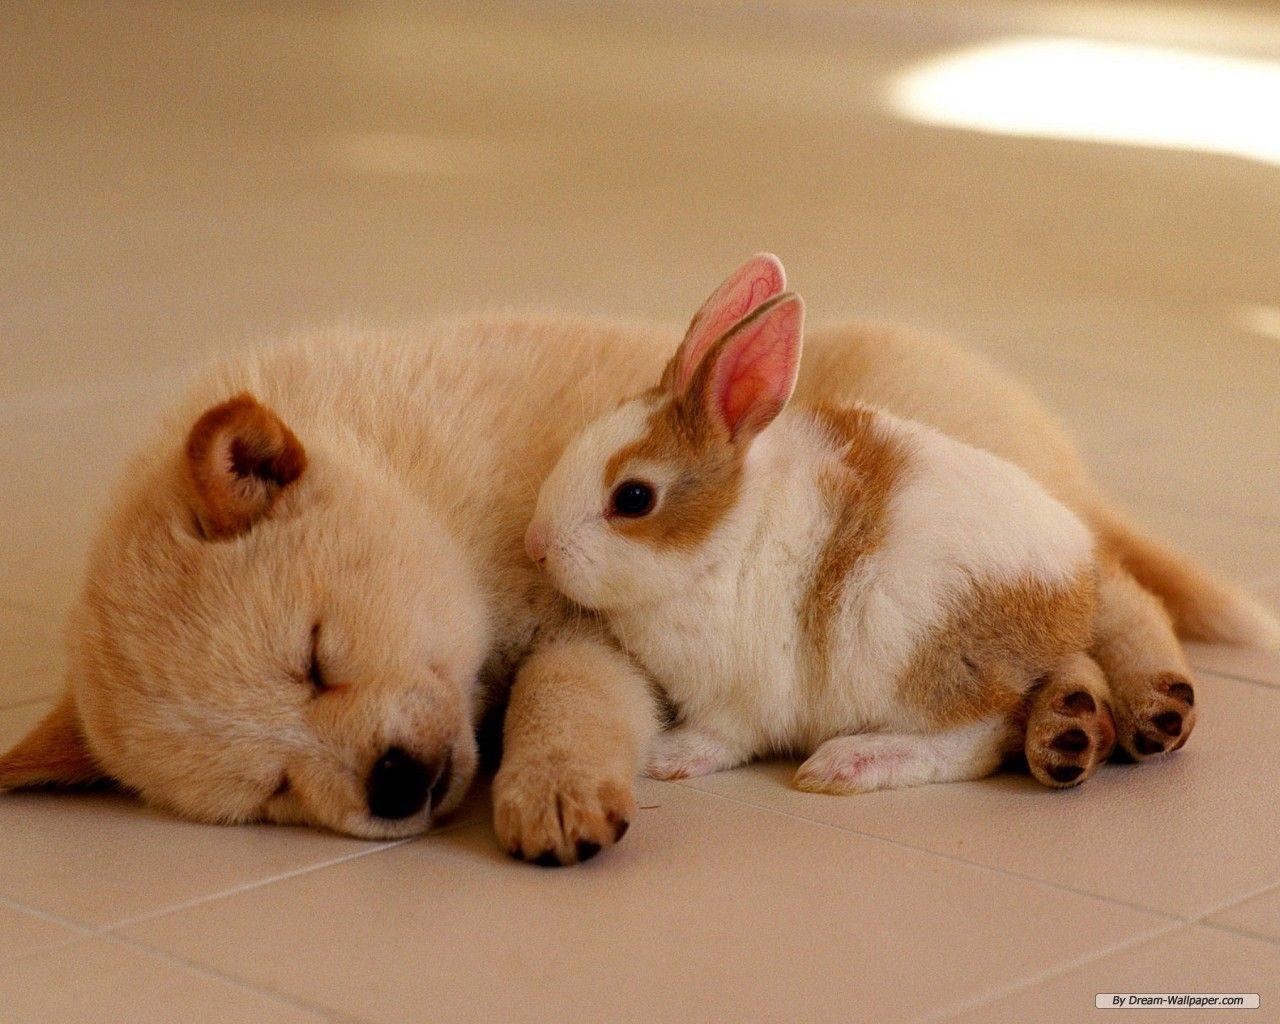 stunning rabit dog baby animal wallpaper for iPhone, Android